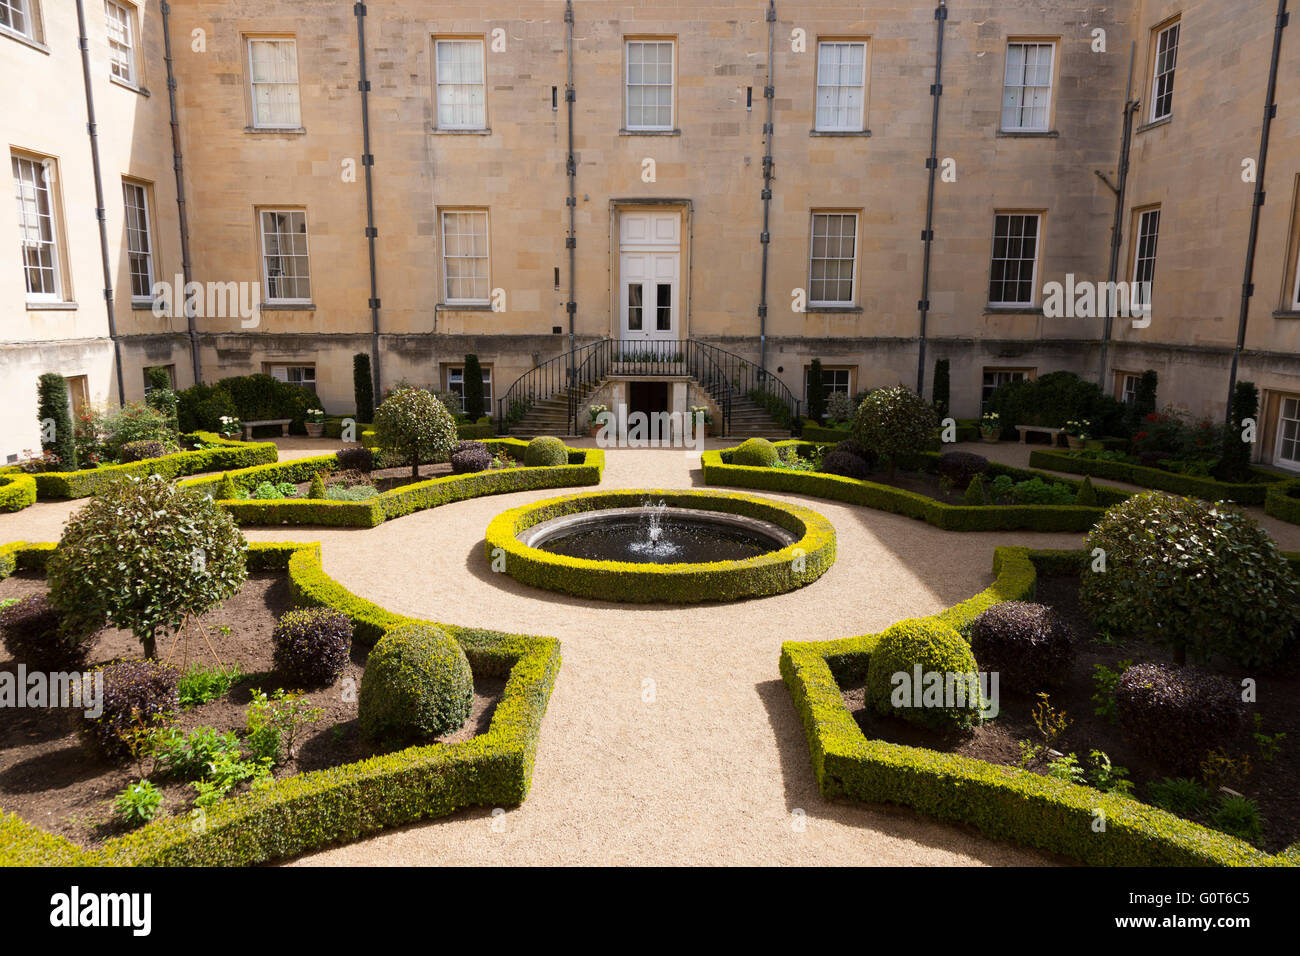 The Inner Court Yard / Courtyard of Syon House with formal garden / gardens and pond with fountain. Syon House, Brentford. UK. Stock Photo